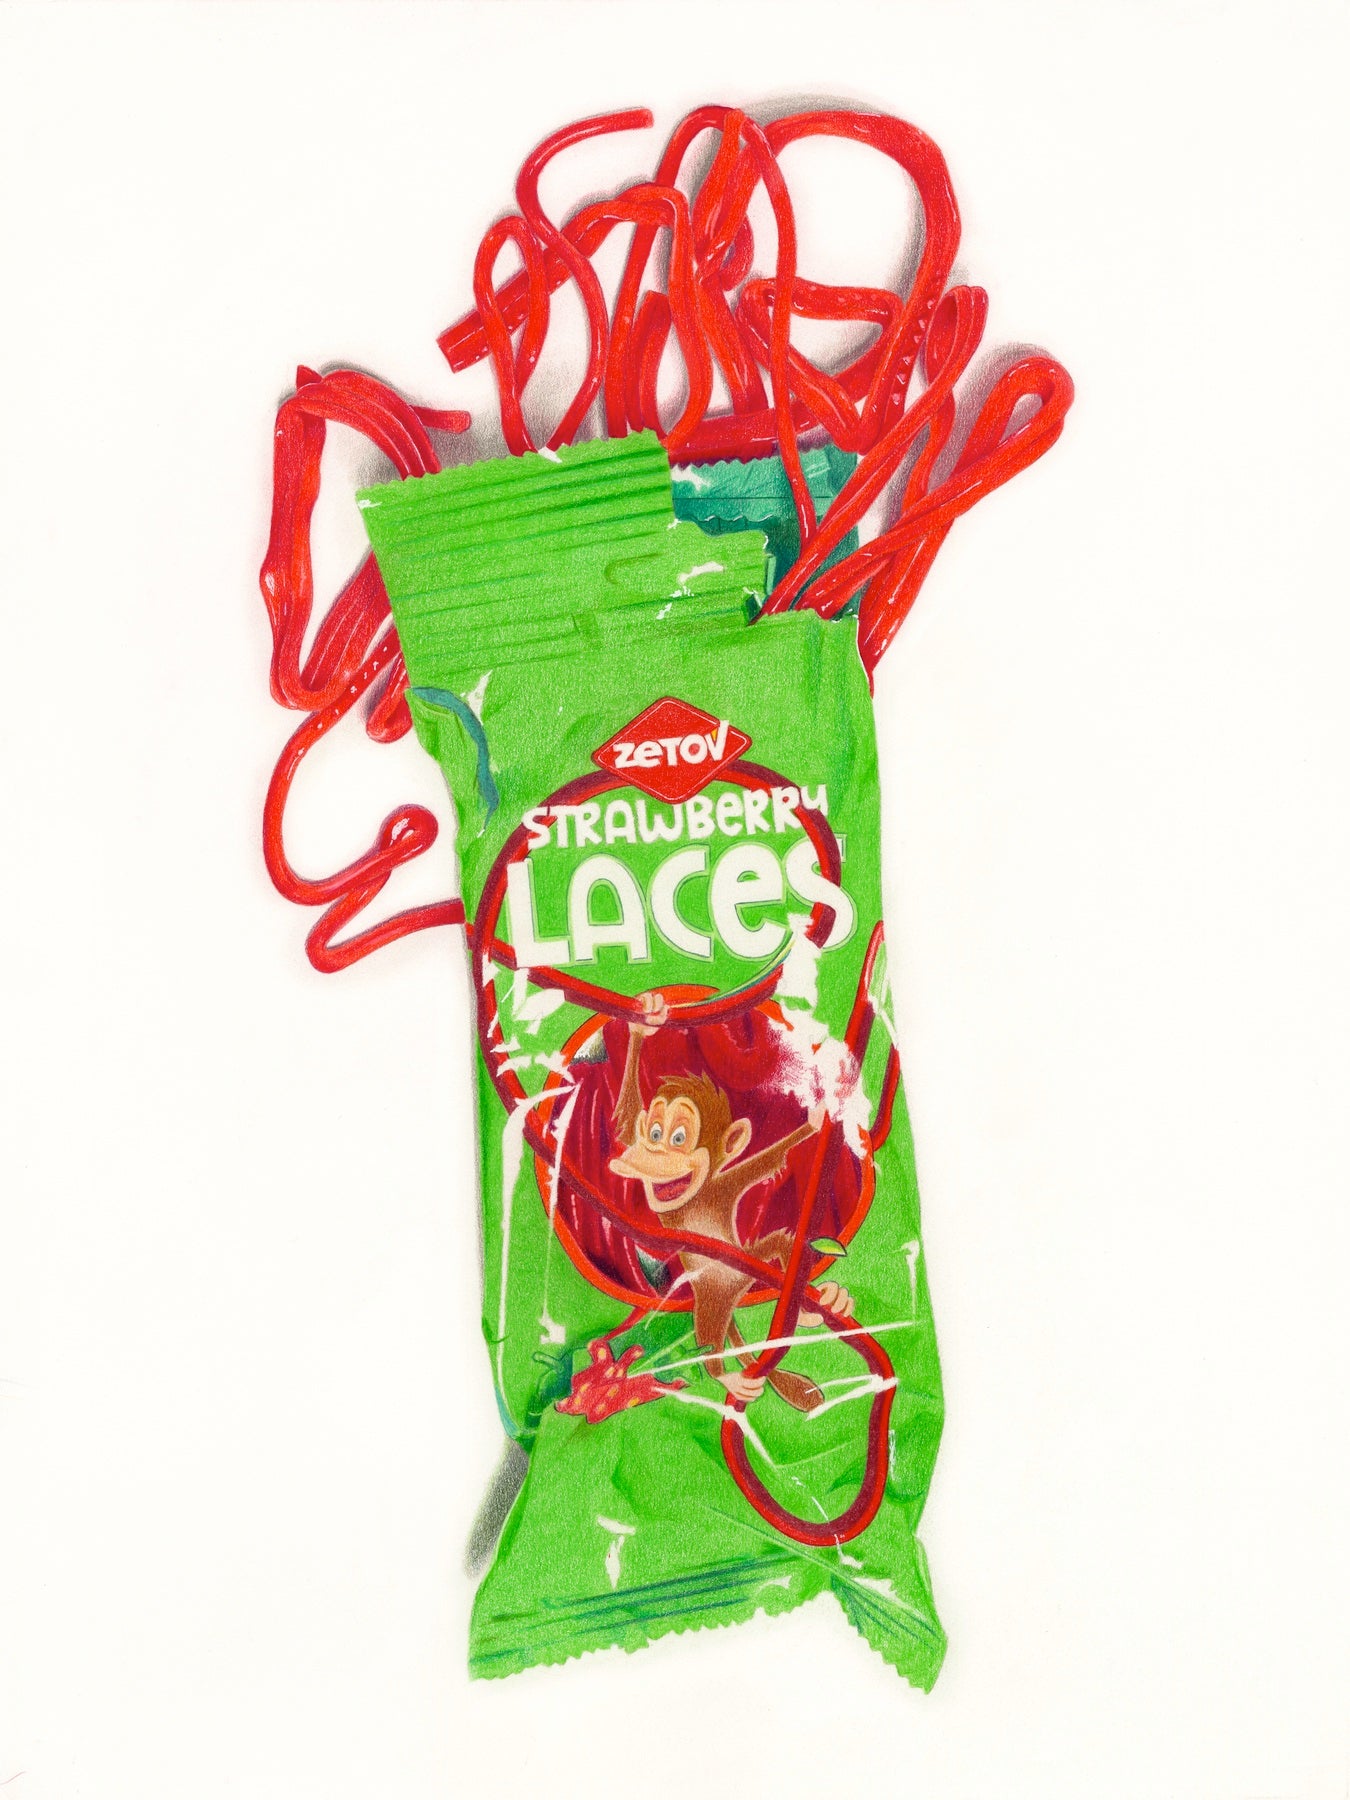 Strawberry Laces